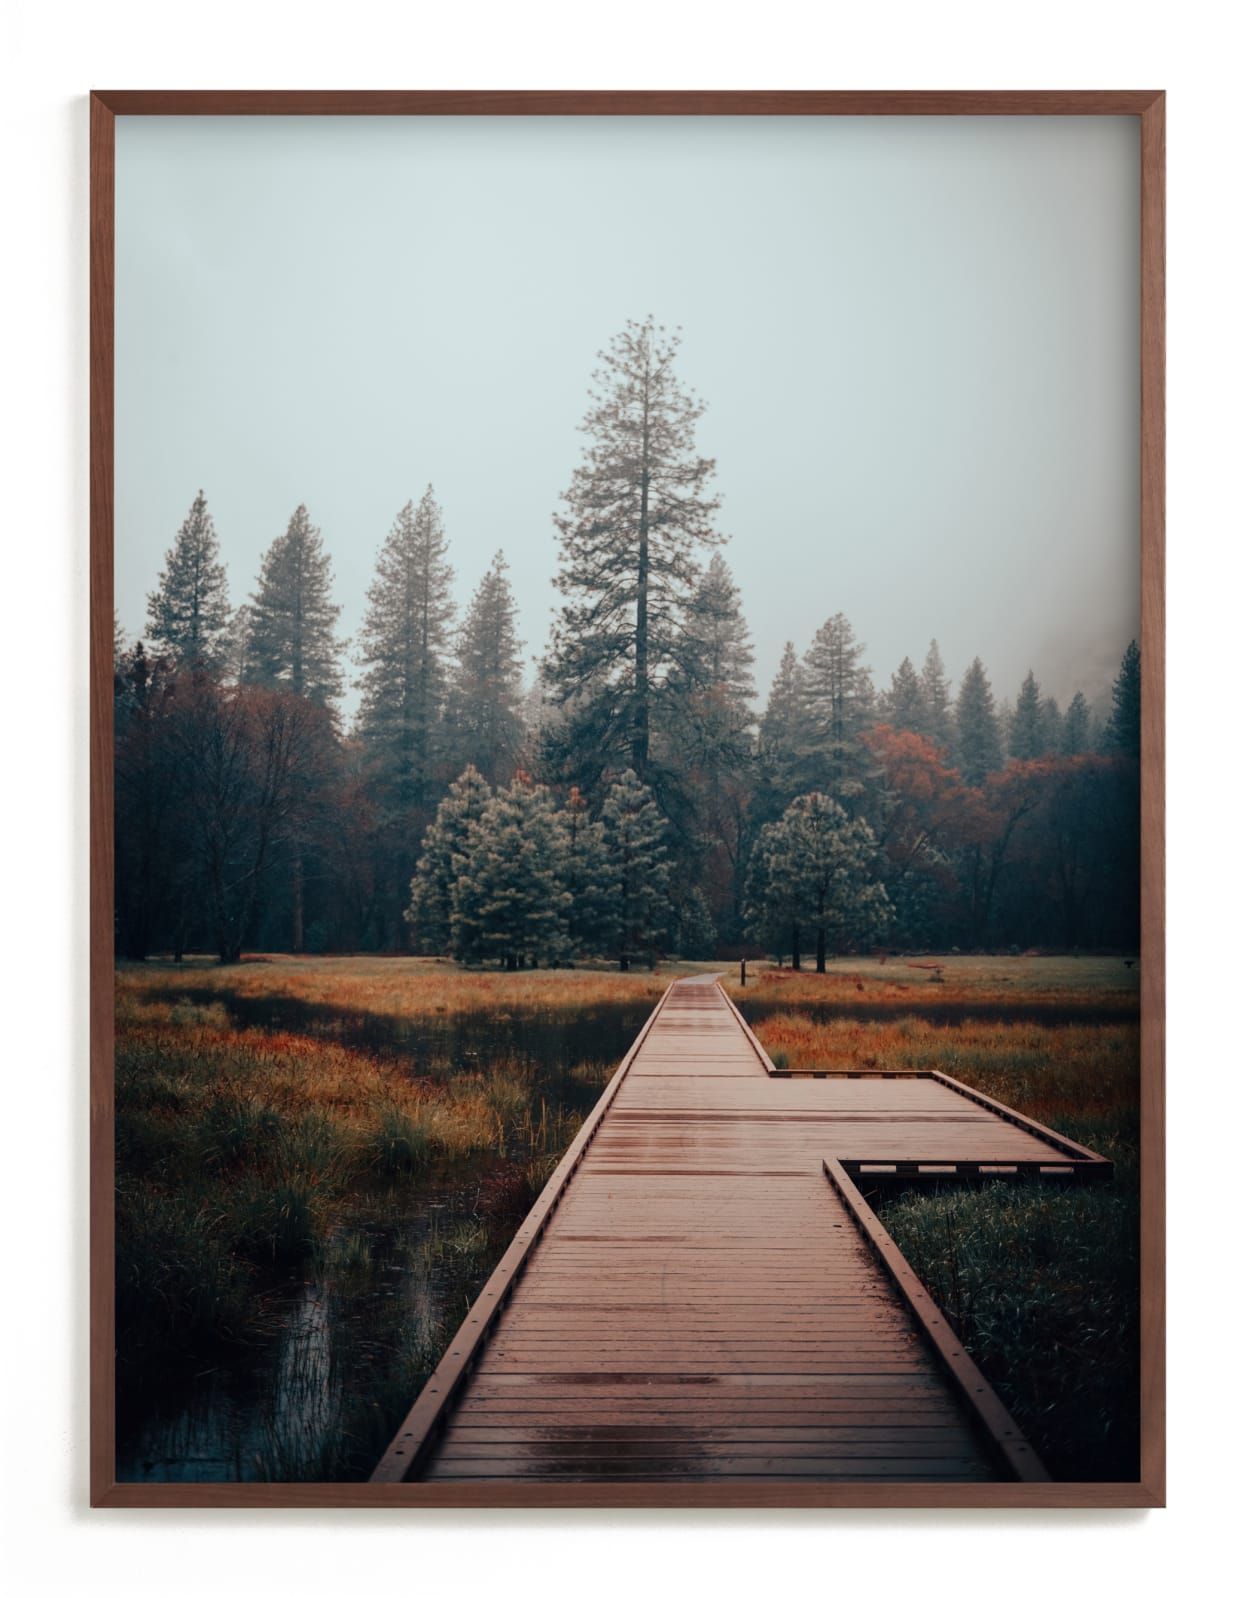 "Misty" - Photography Limited Edition Art Print by Tania Medeiros. | Minted